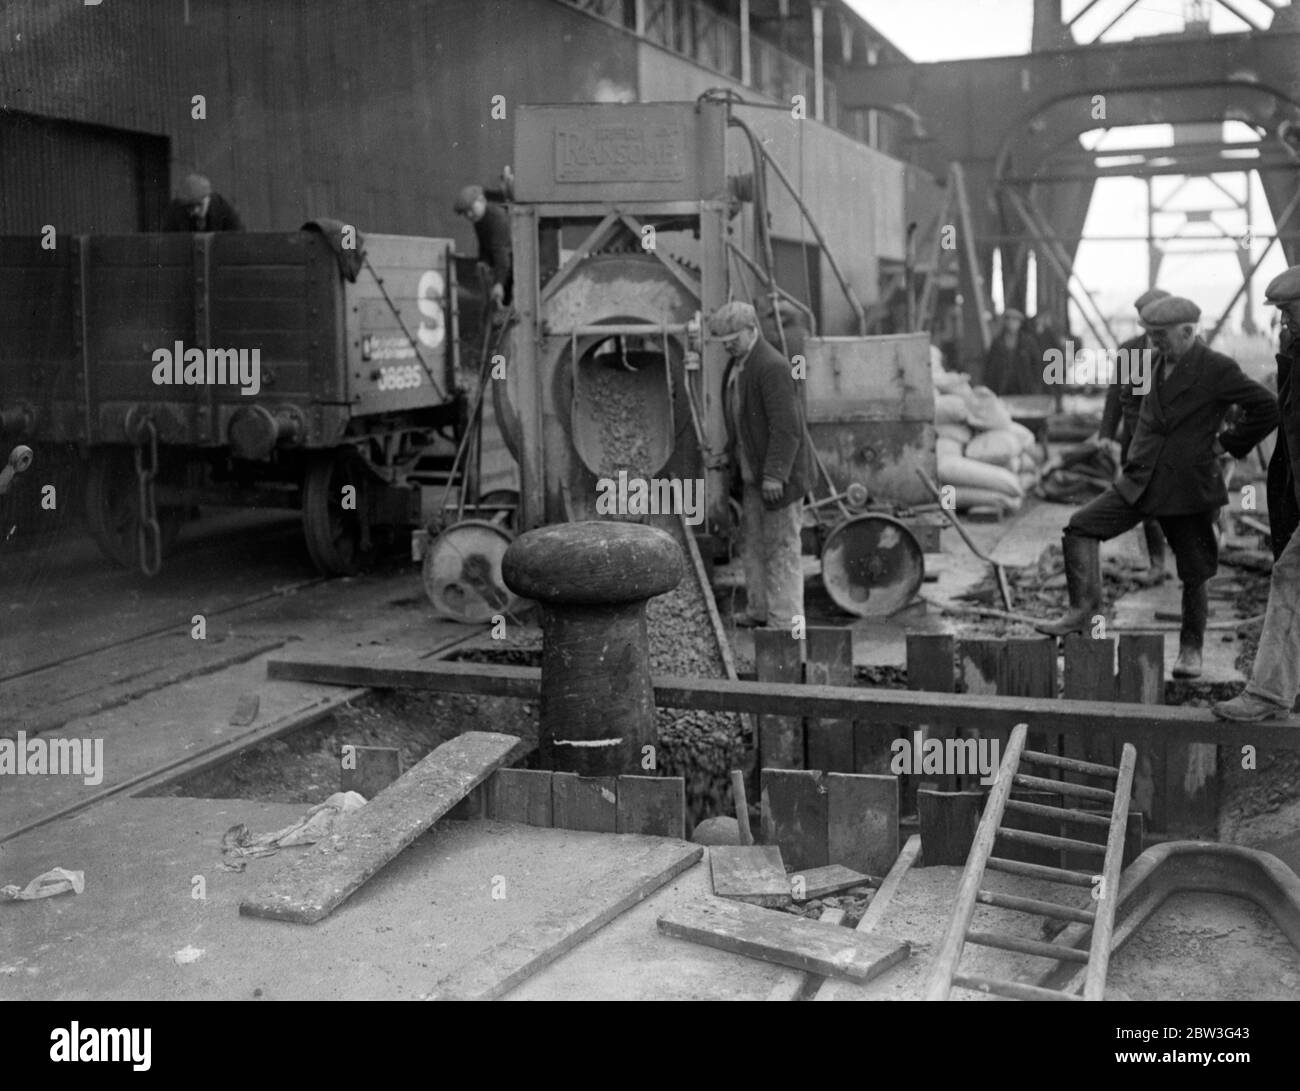 Strengthening ' Queen Mary ' s ' berth at Southampton . The berth which will be used by the giant new liner ' Queen Mary ' at Southampton is being reinforced . Extra strong bollards are being fitted in the quayside . Photo shows fitting the extra strong bollards in the quayside in readiness for the ' Queen Mary ' at Southampton . 6 March 1936 Stock Photo